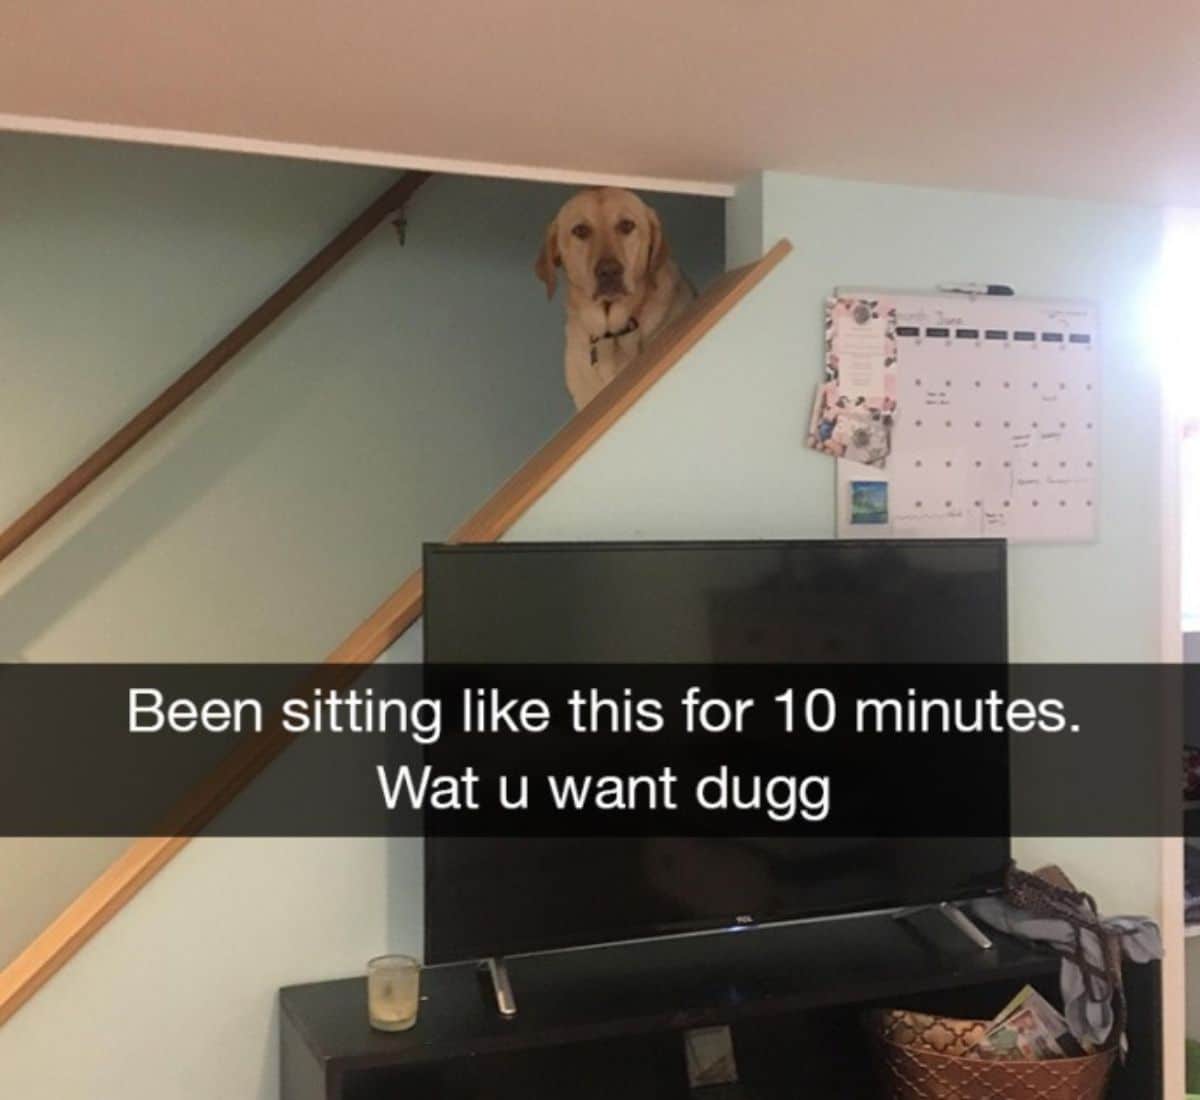 yellow labrador retriever sitting on stairs looking into a room with the caption Been fitting like this for 10 minutes. Wat u want dugg